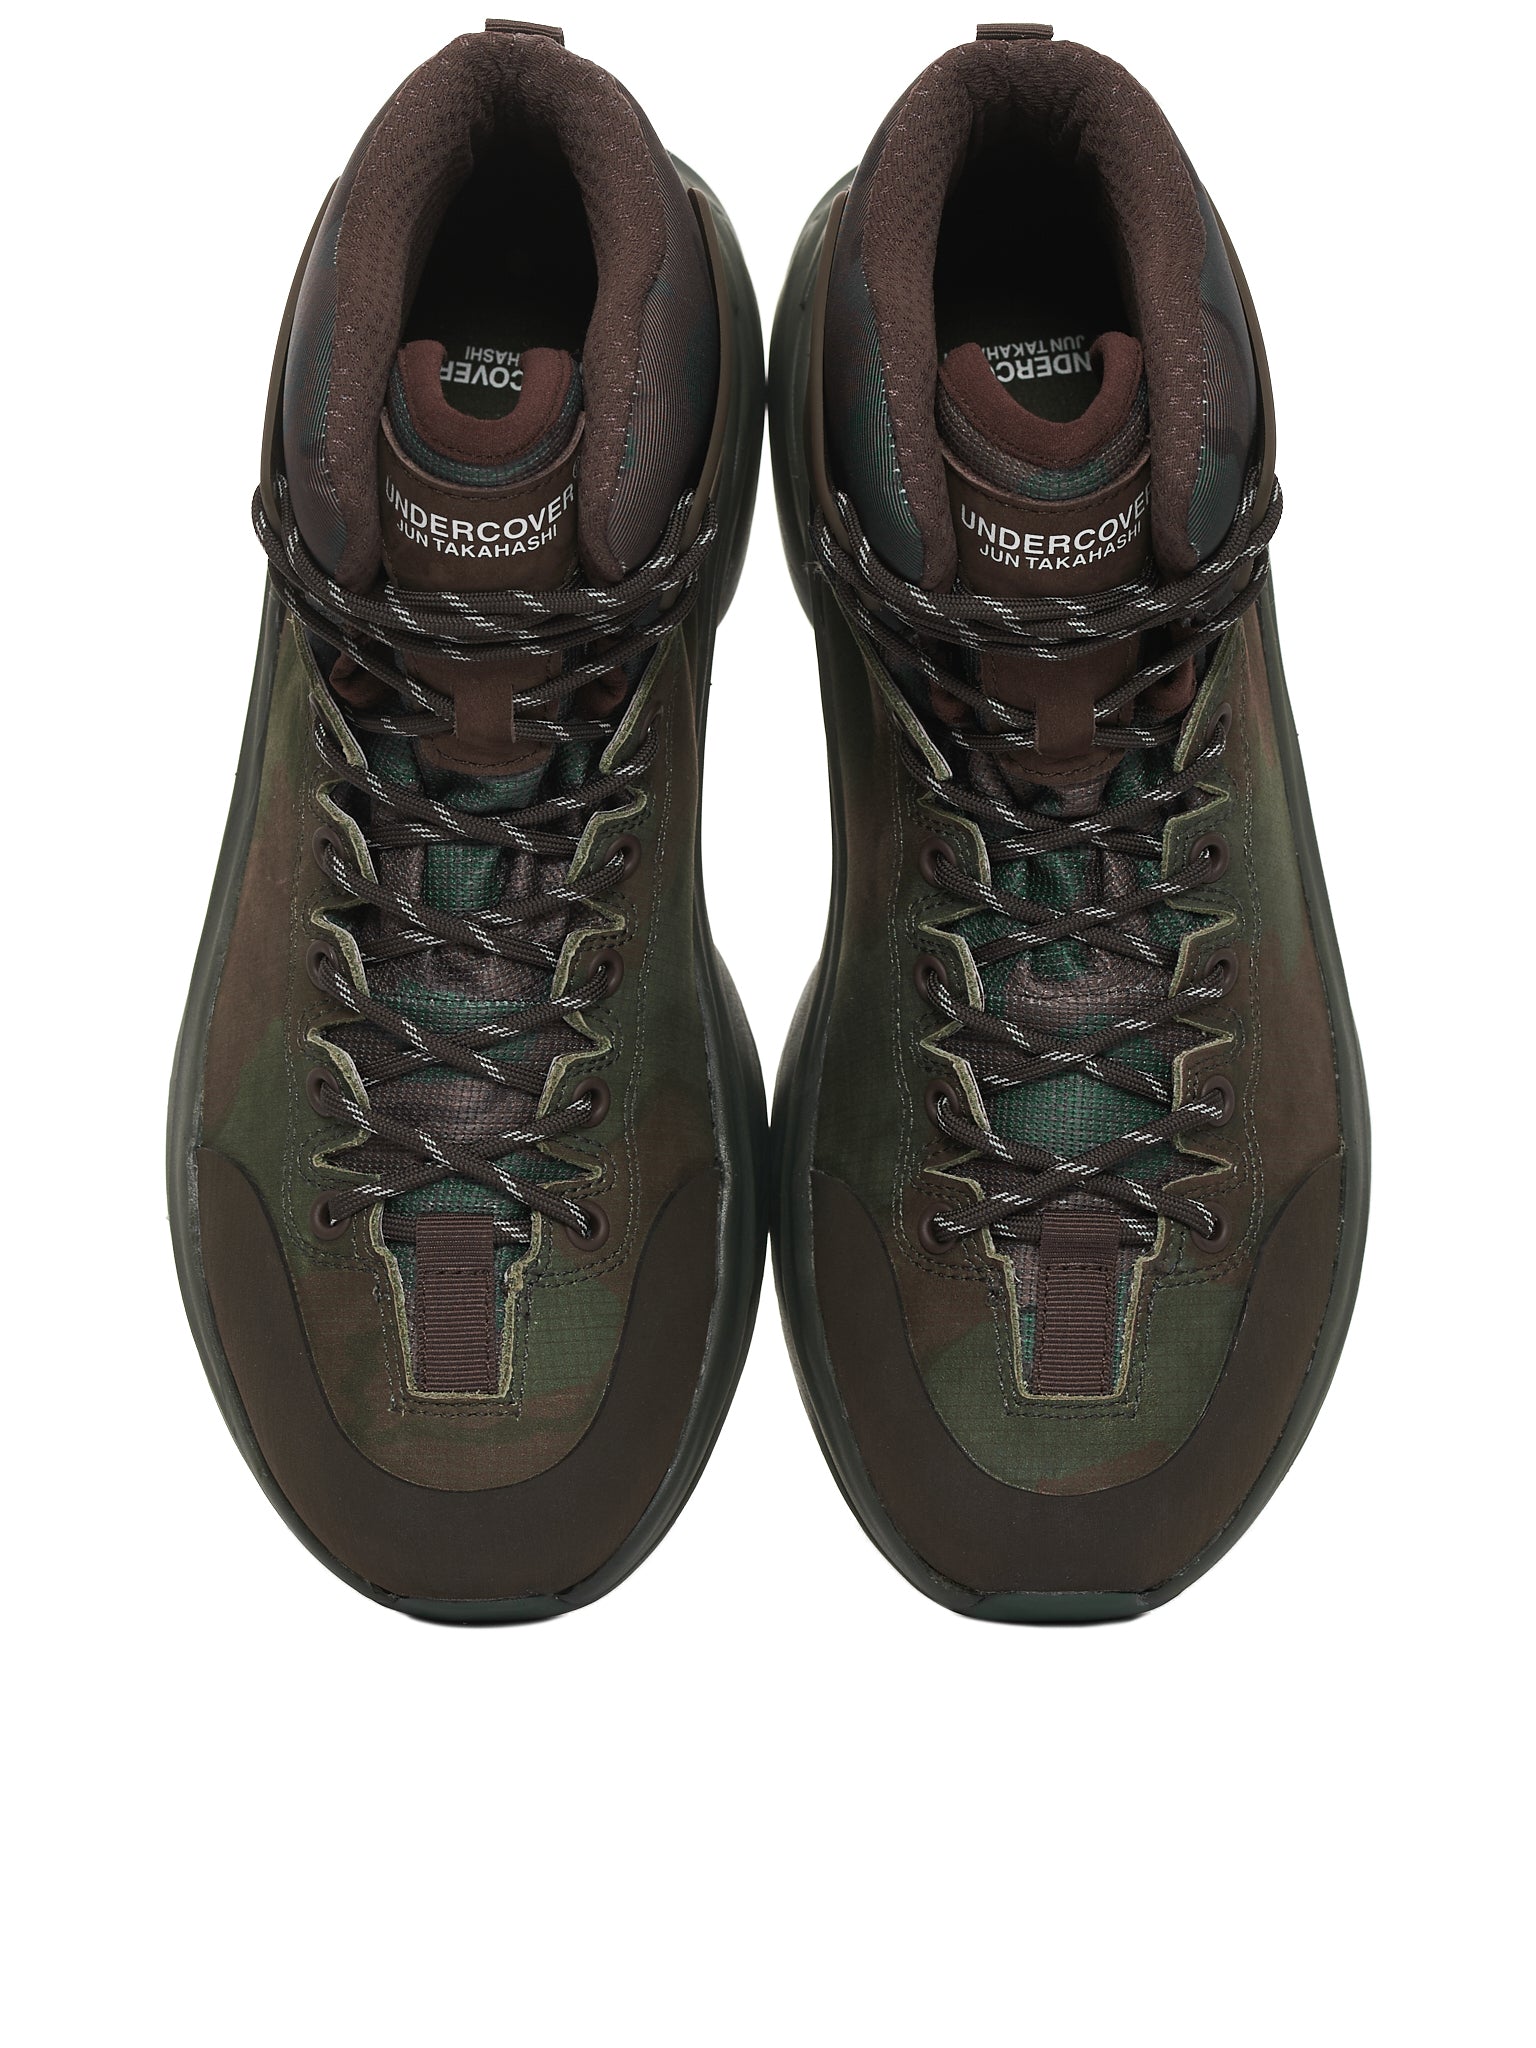 Undercover Camo Boots | H. Lorenzo - top